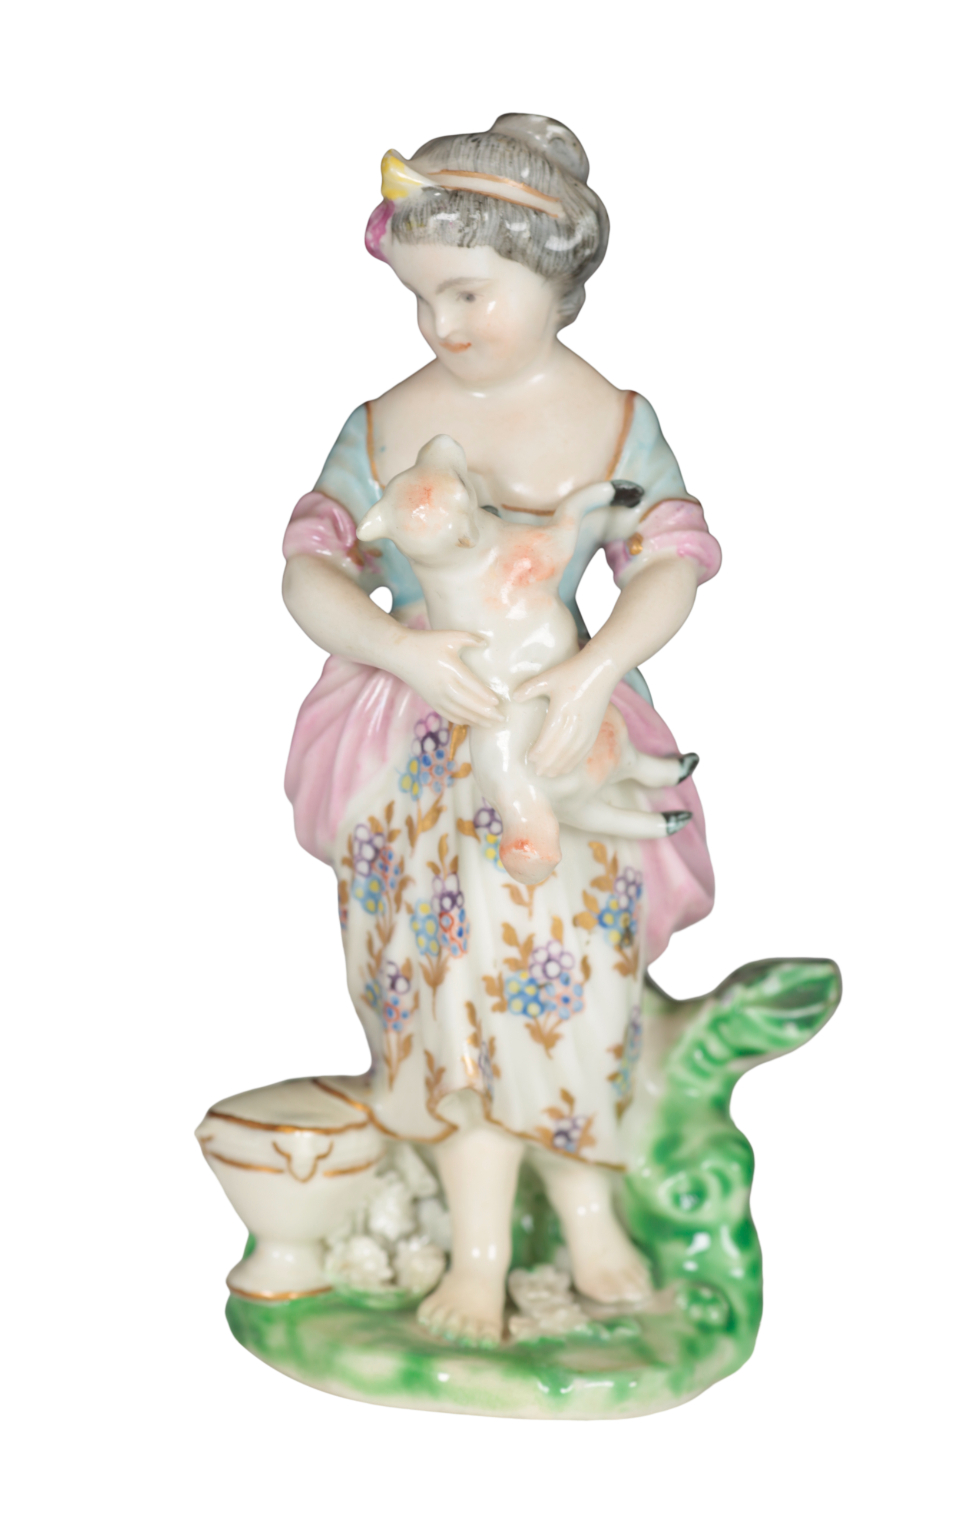 A PAIR OF 18TH CENTURY DUESBURY & CO DERBY PORCELAIN FIGURES - CHILDREN WITH ANIMALS - Image 3 of 4